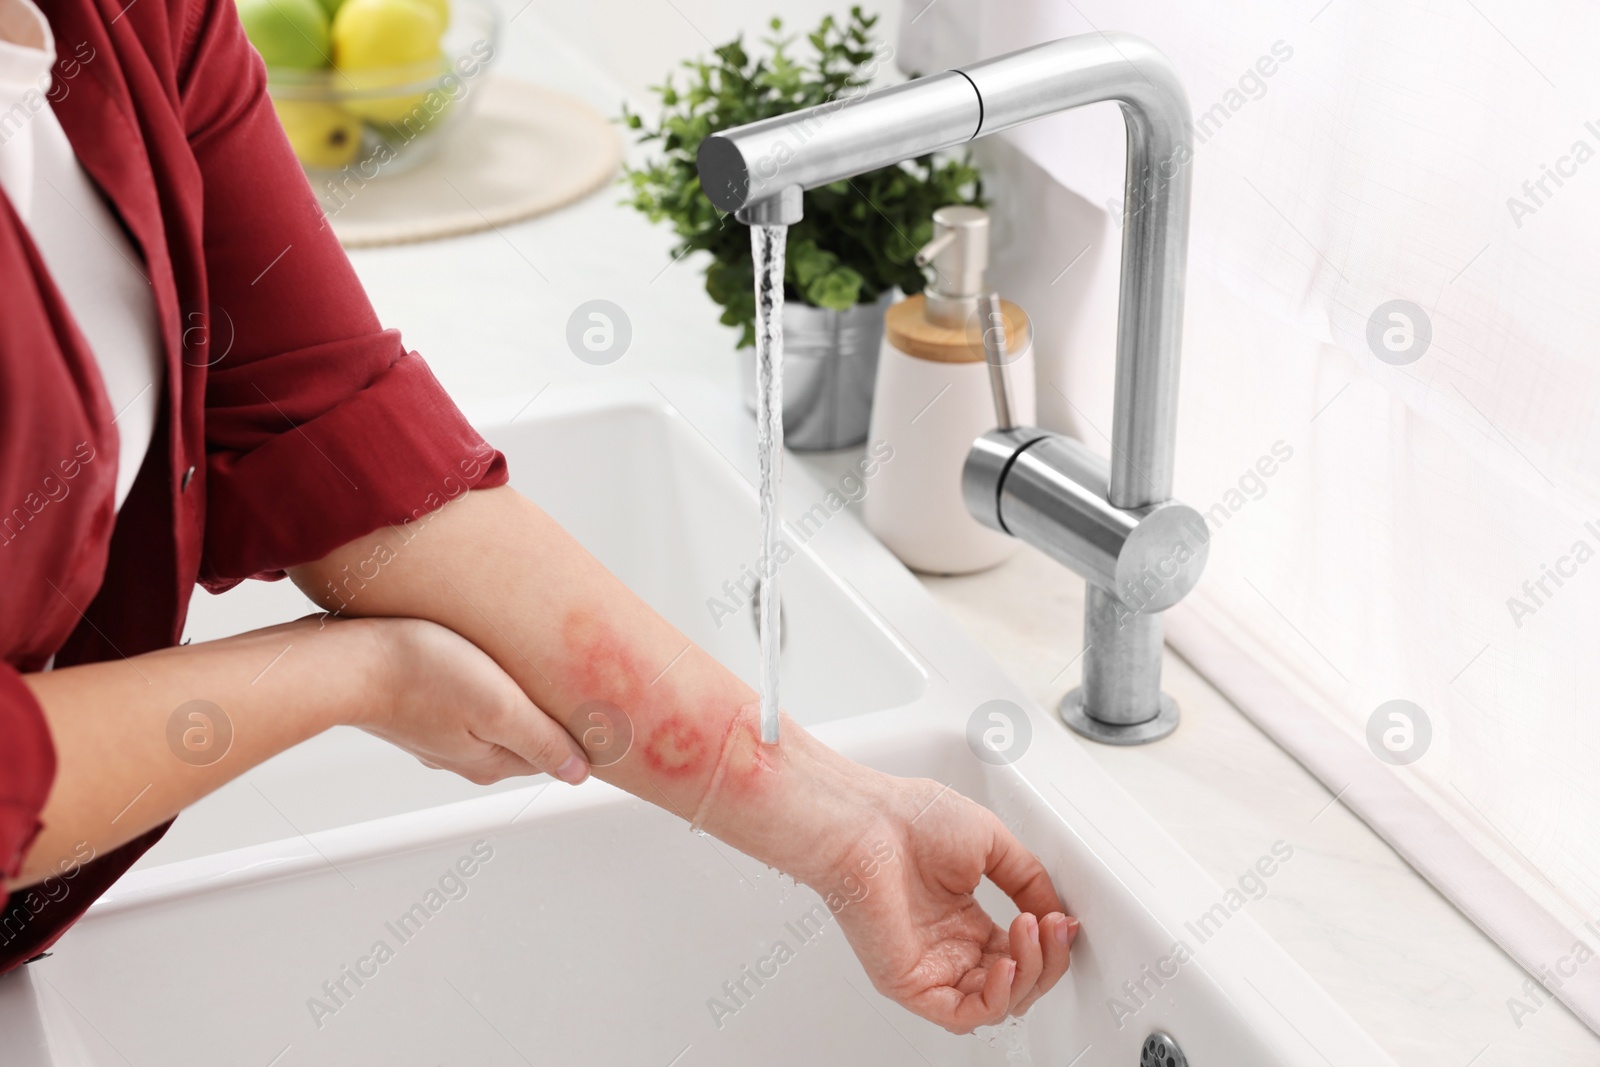 Photo of Woman putting hand with burns under cold running water indoors, closeup